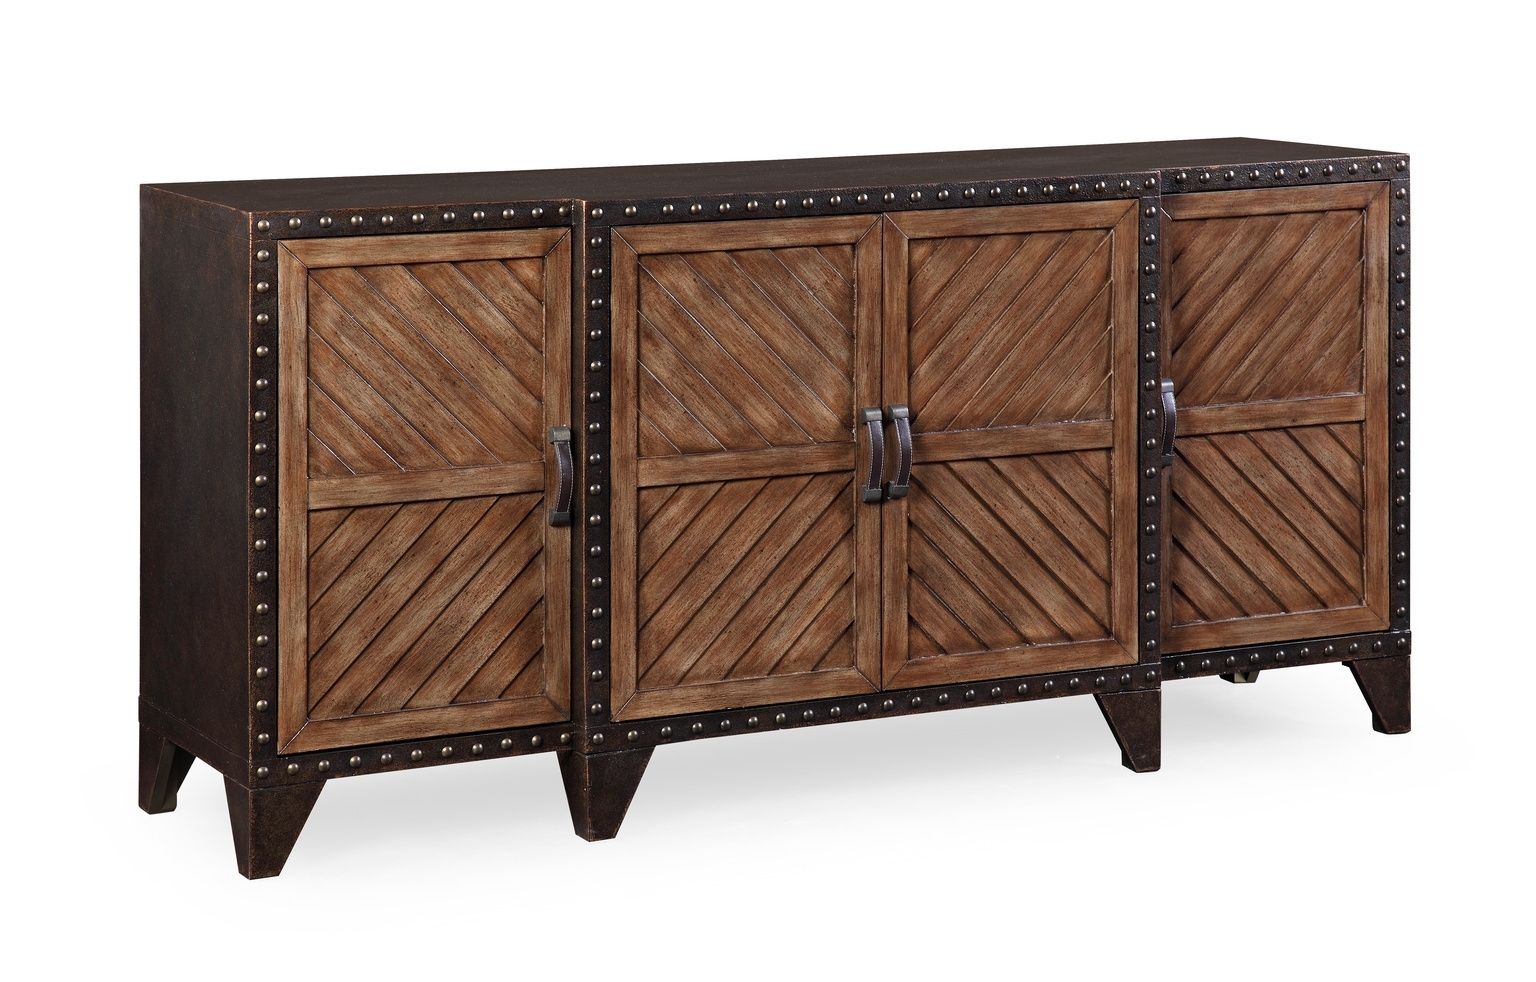 Sideboards, Cabinets, Shelving Throughout Recent Black Oak Wood And Wrought Iron Sideboards (View 11 of 20)